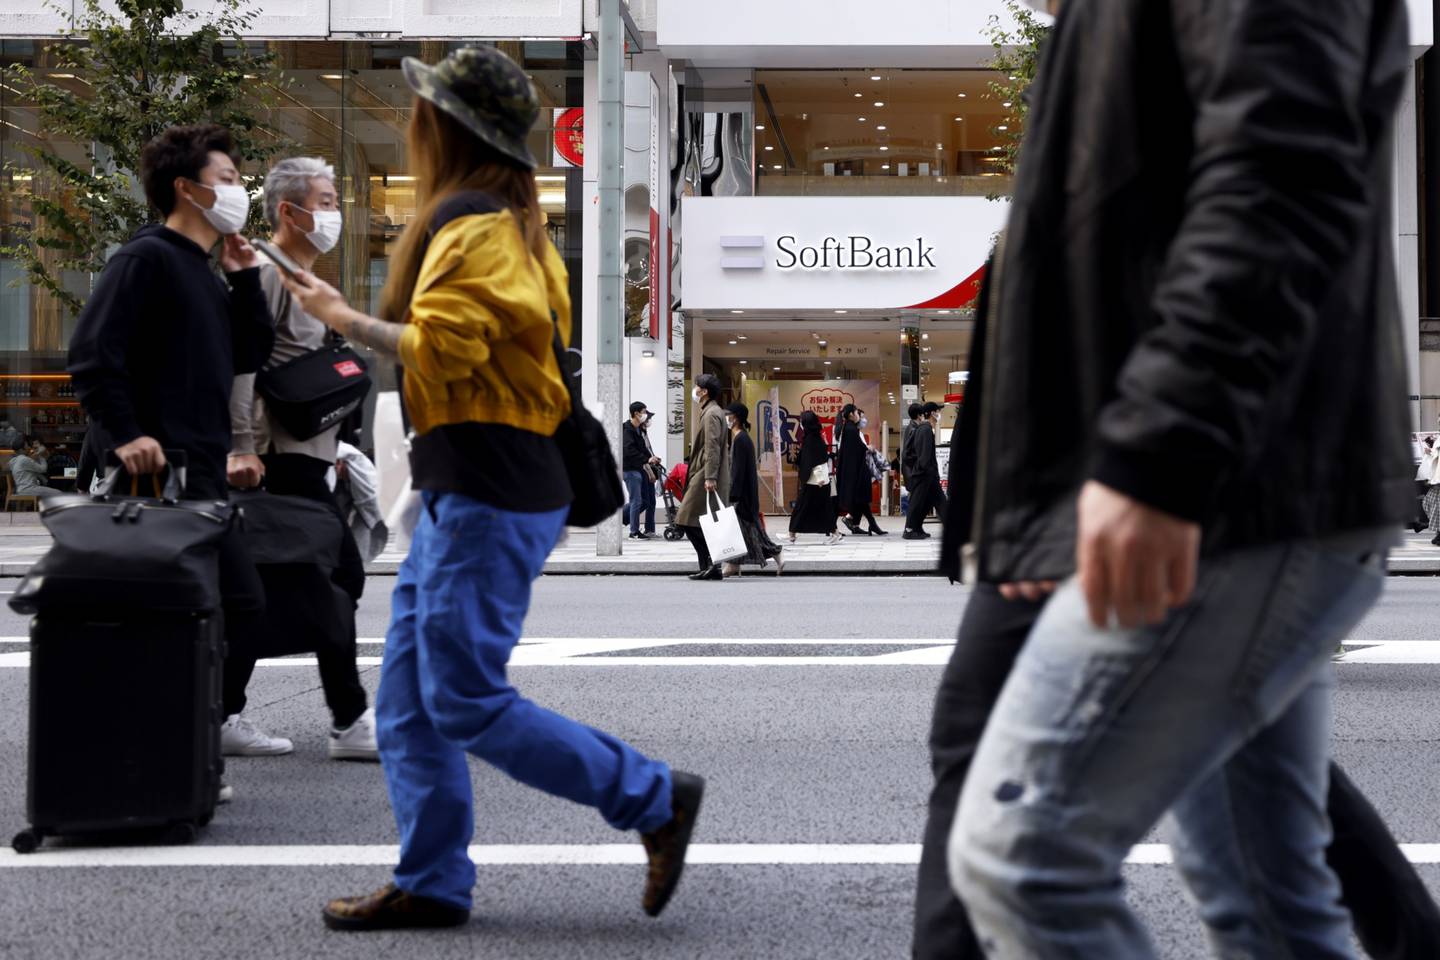 Pedestrians in front of a SoftBank Corp. store in Tokyo, Japan, on Sunday, Nov. 7, 2021.